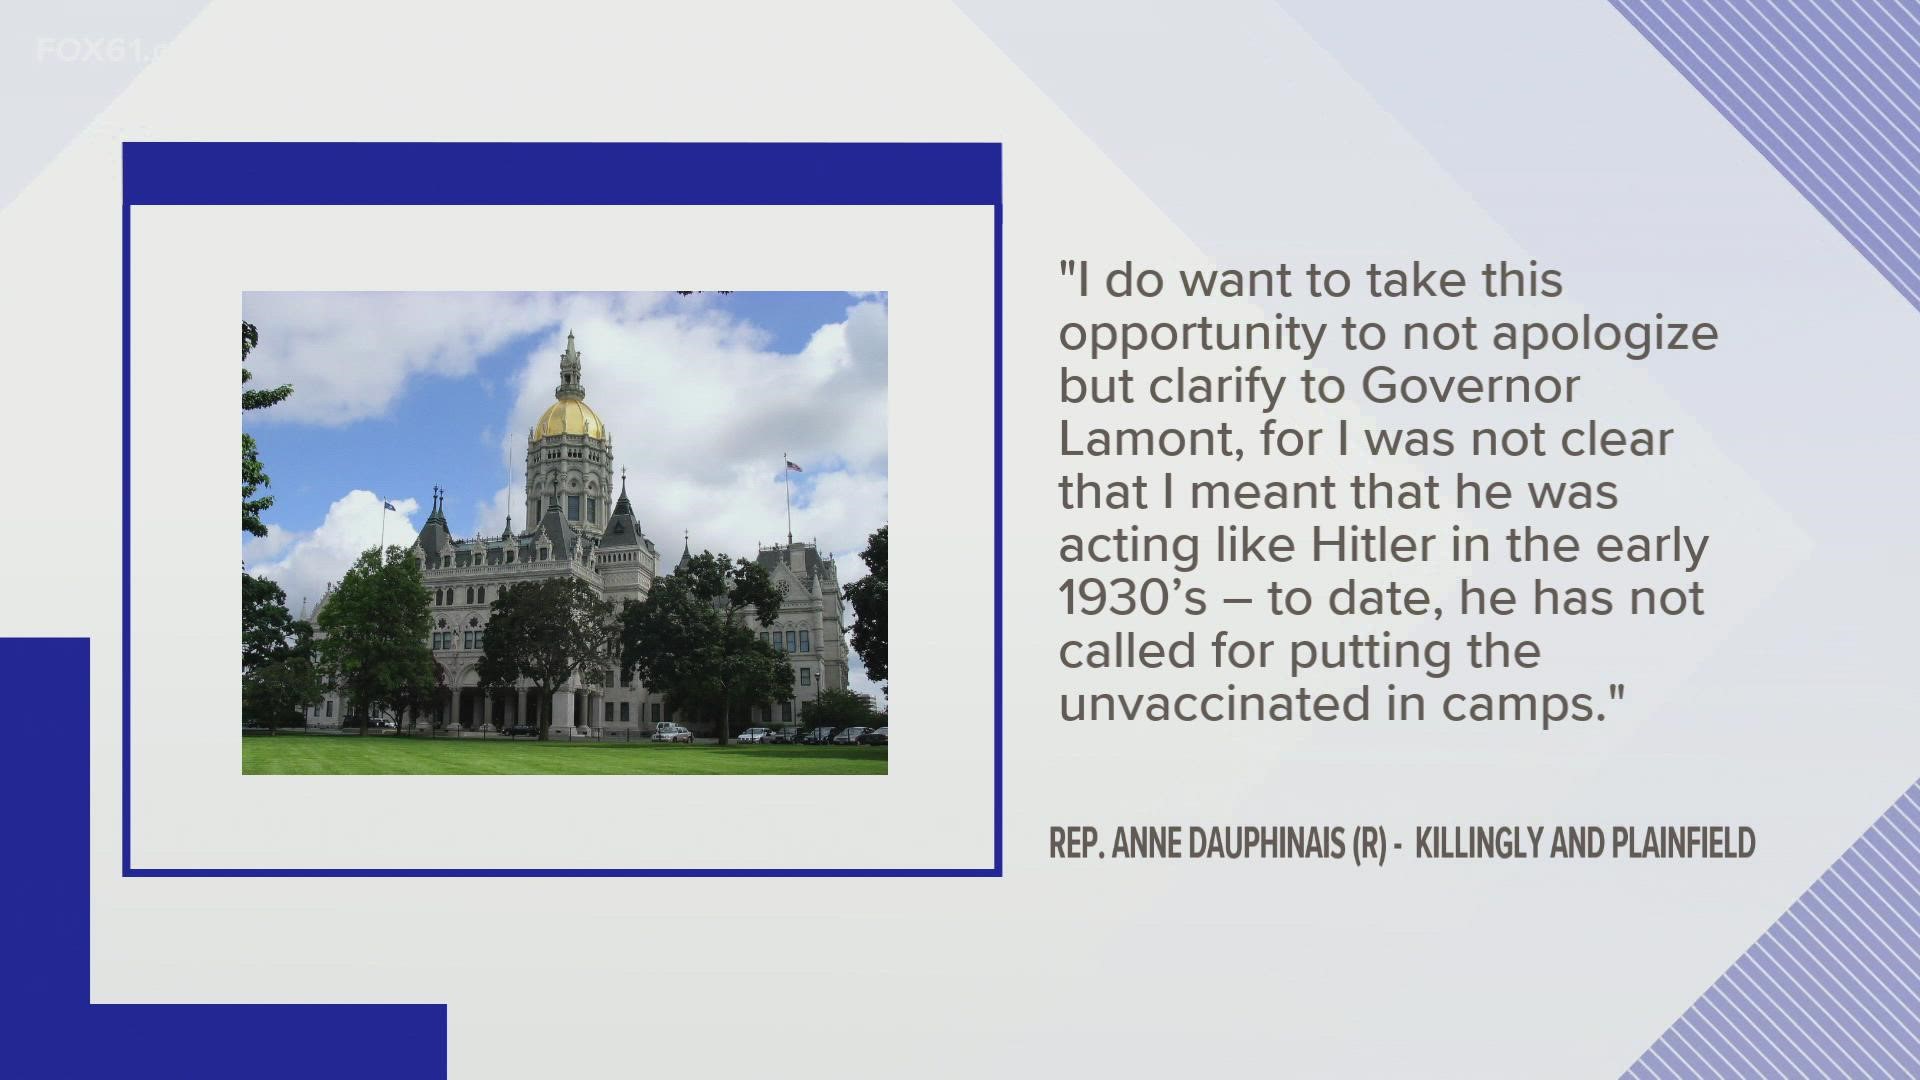 Republican state Rep. Anne Dauphinais stands by her comparison, but the Jewish Federation of Eastern Connecticut says it doesn't respect the tragedy of WWII.